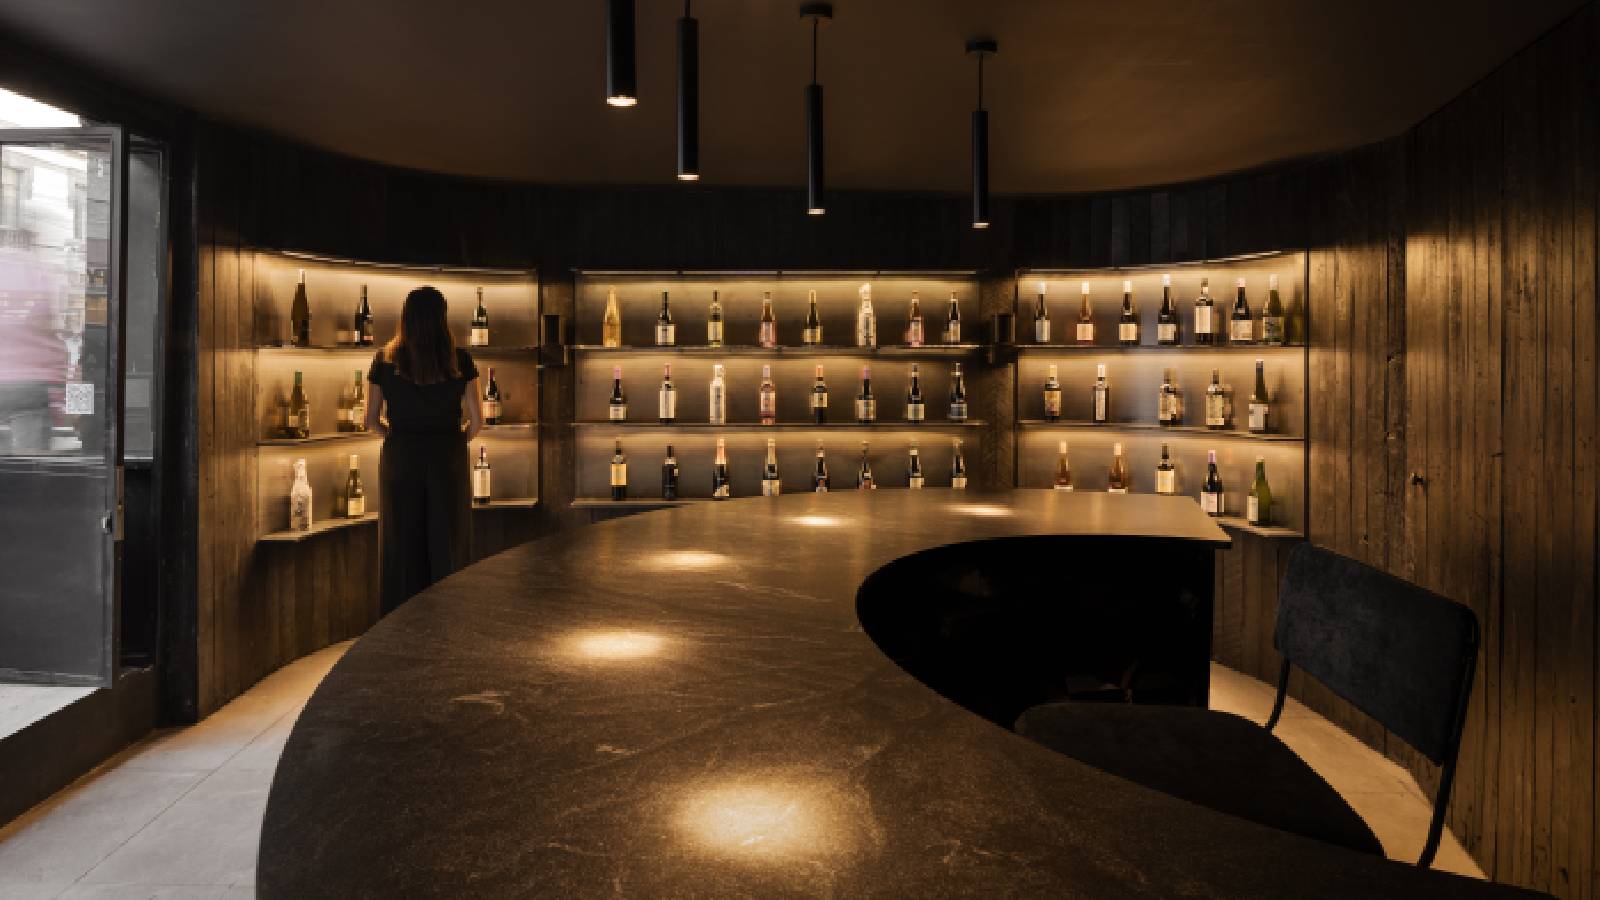 Vinos Chidos wine store in mexico by alfille arquitectos.